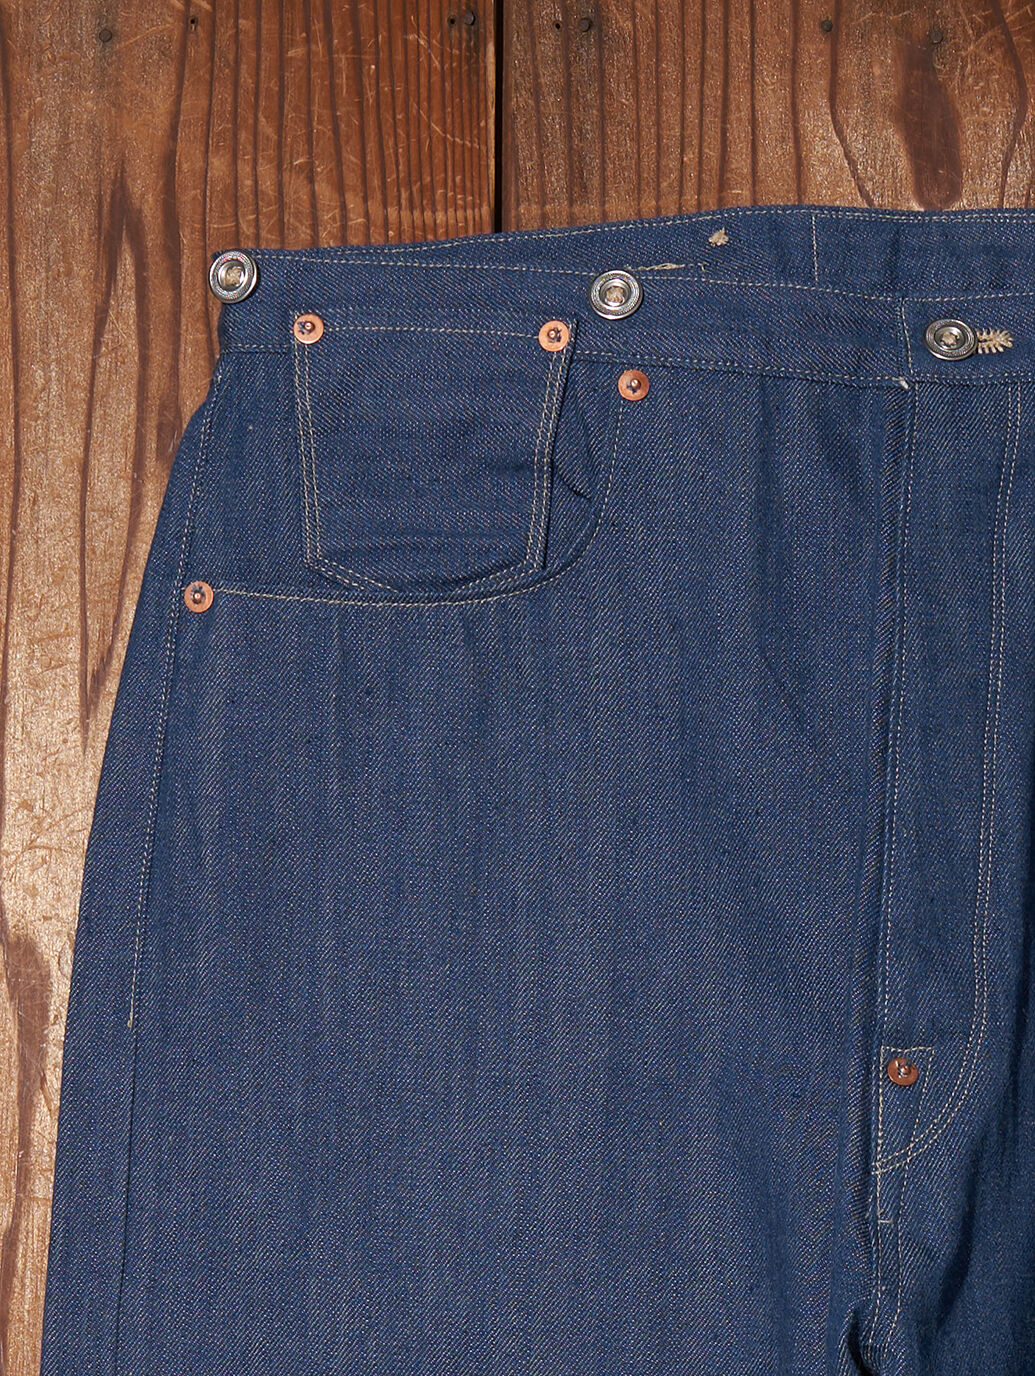 LIMITED EDITION LEVI'S® VINTAGE CLOTHING1873 XX Waist Overall 